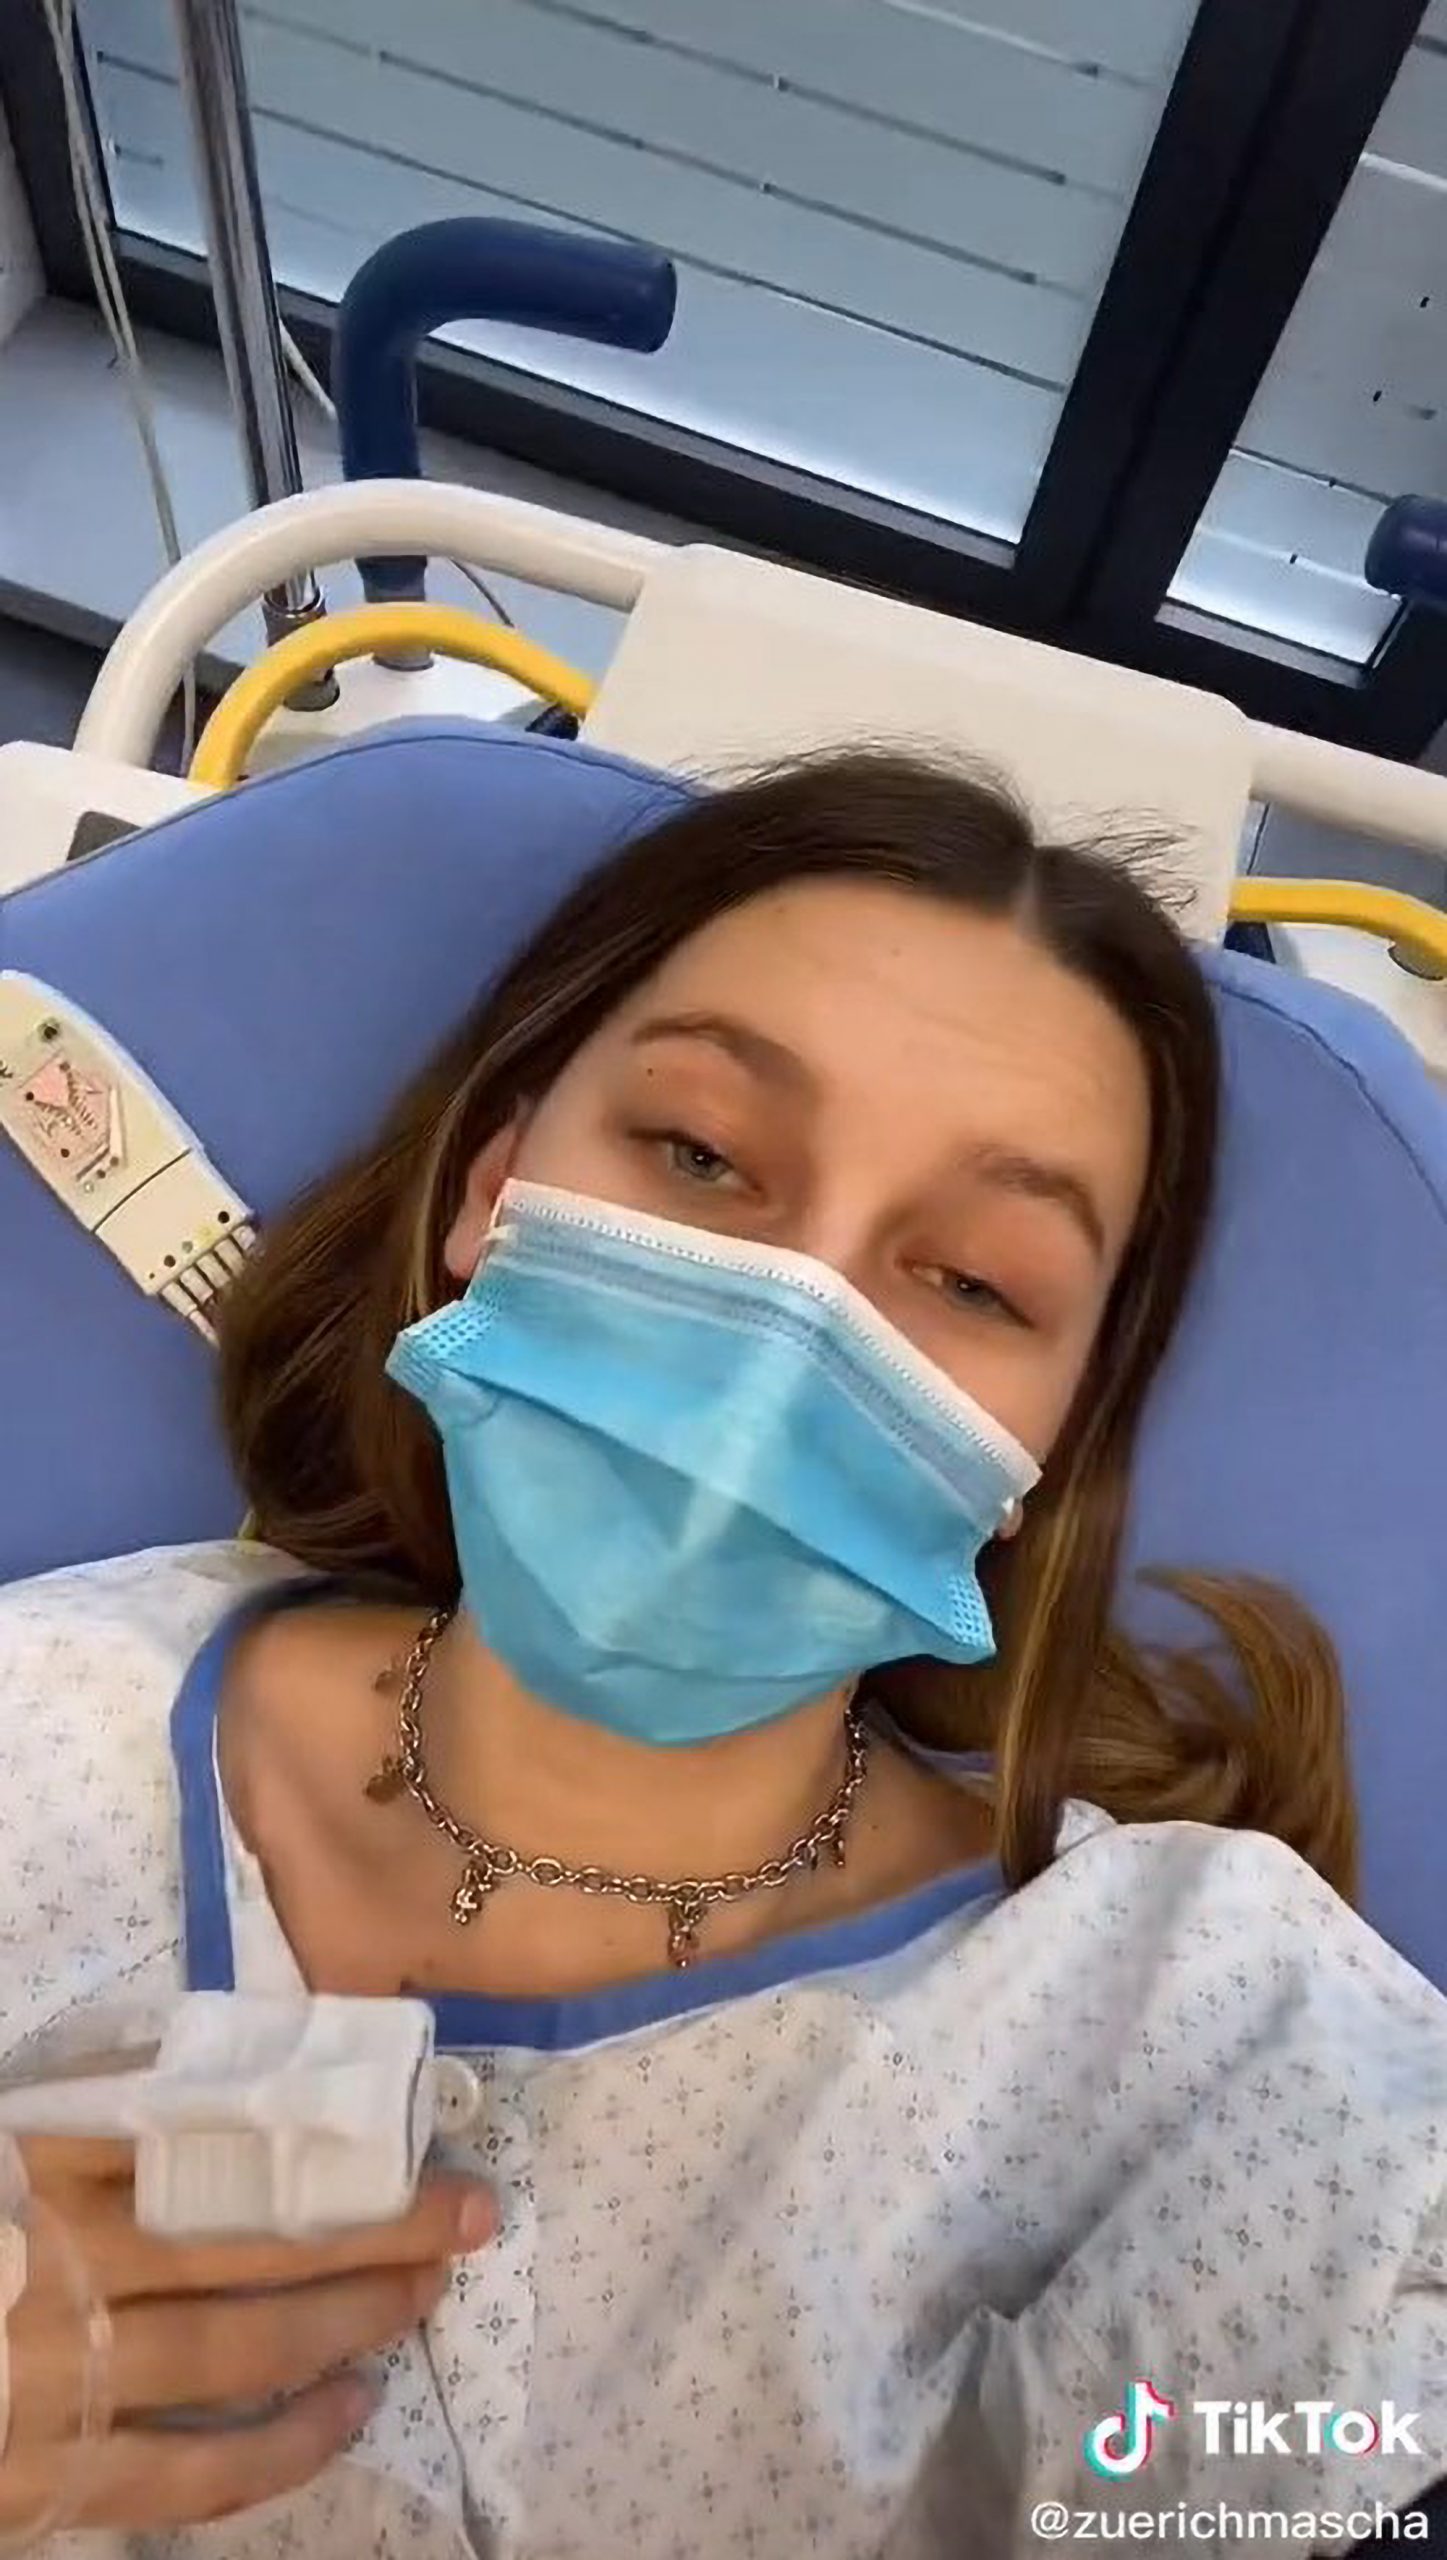 Read more about the article Teen Who Drinks 12 Cans Of Red Bull Per Day Collapses And Ends Up In Hospital With Heart Cramps